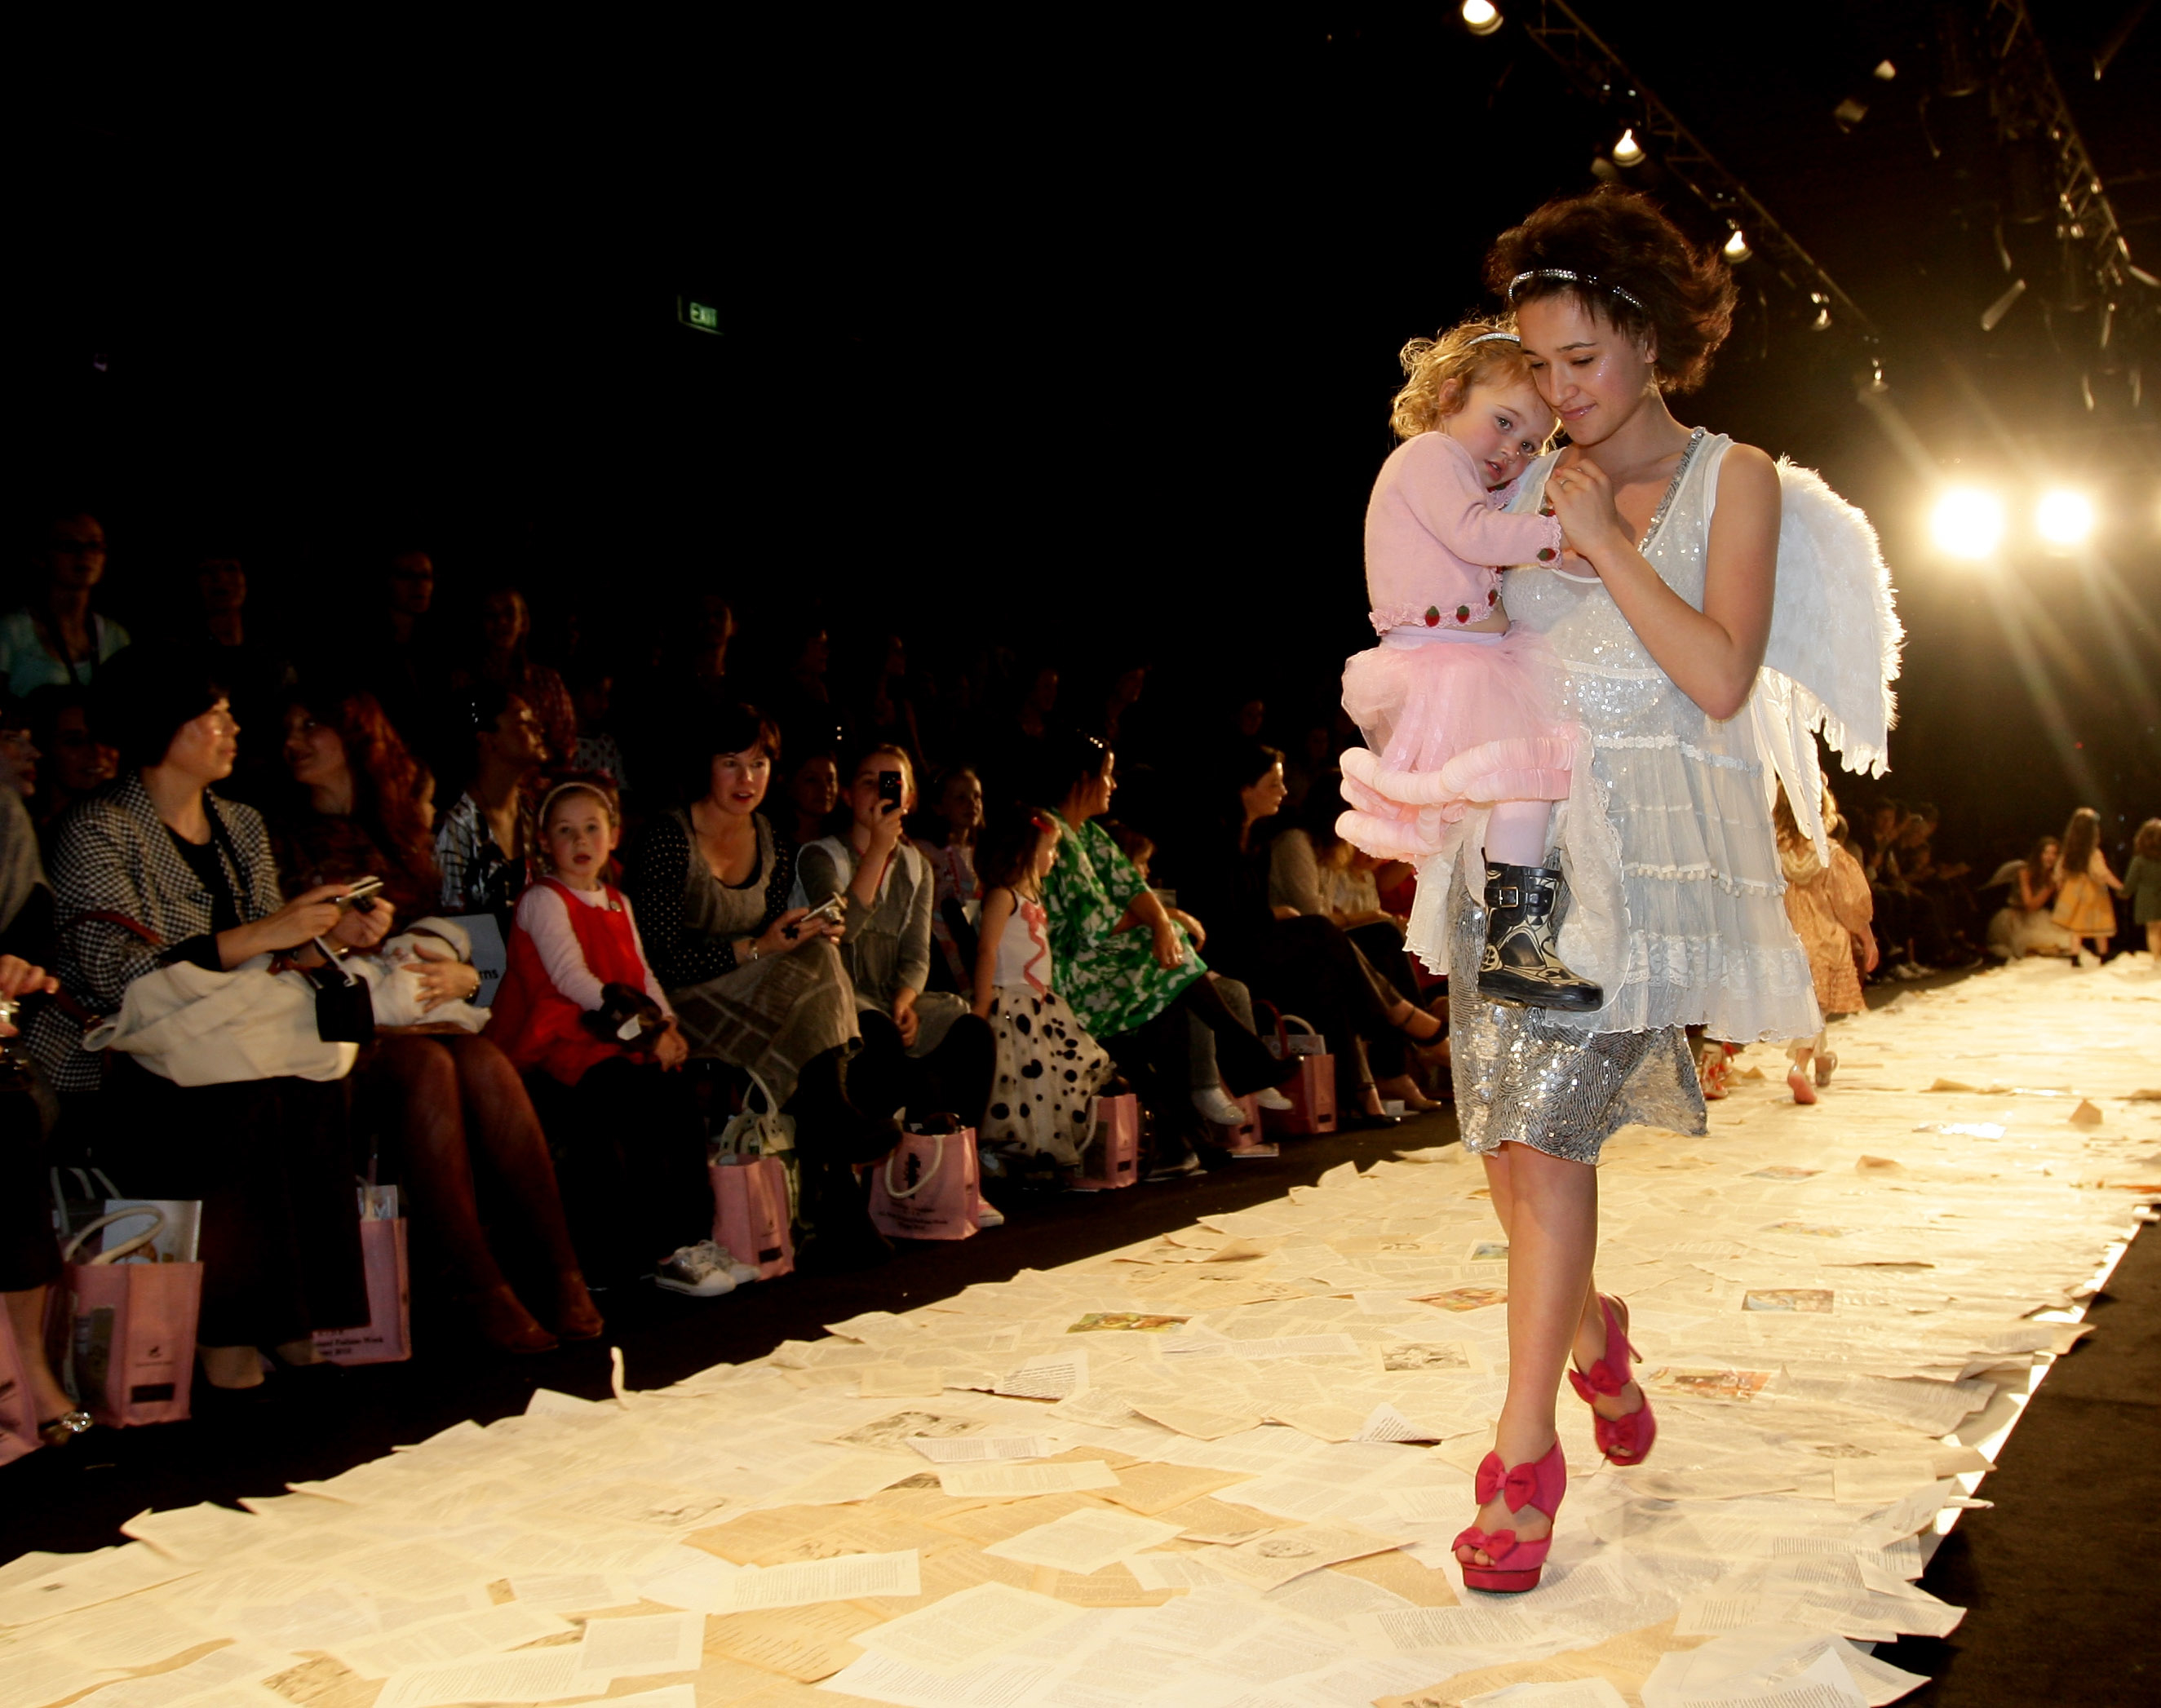 Keisha Castle-Hughes walks down the runway in red heels and a silver/white outfit as she holds her daughter in her arms